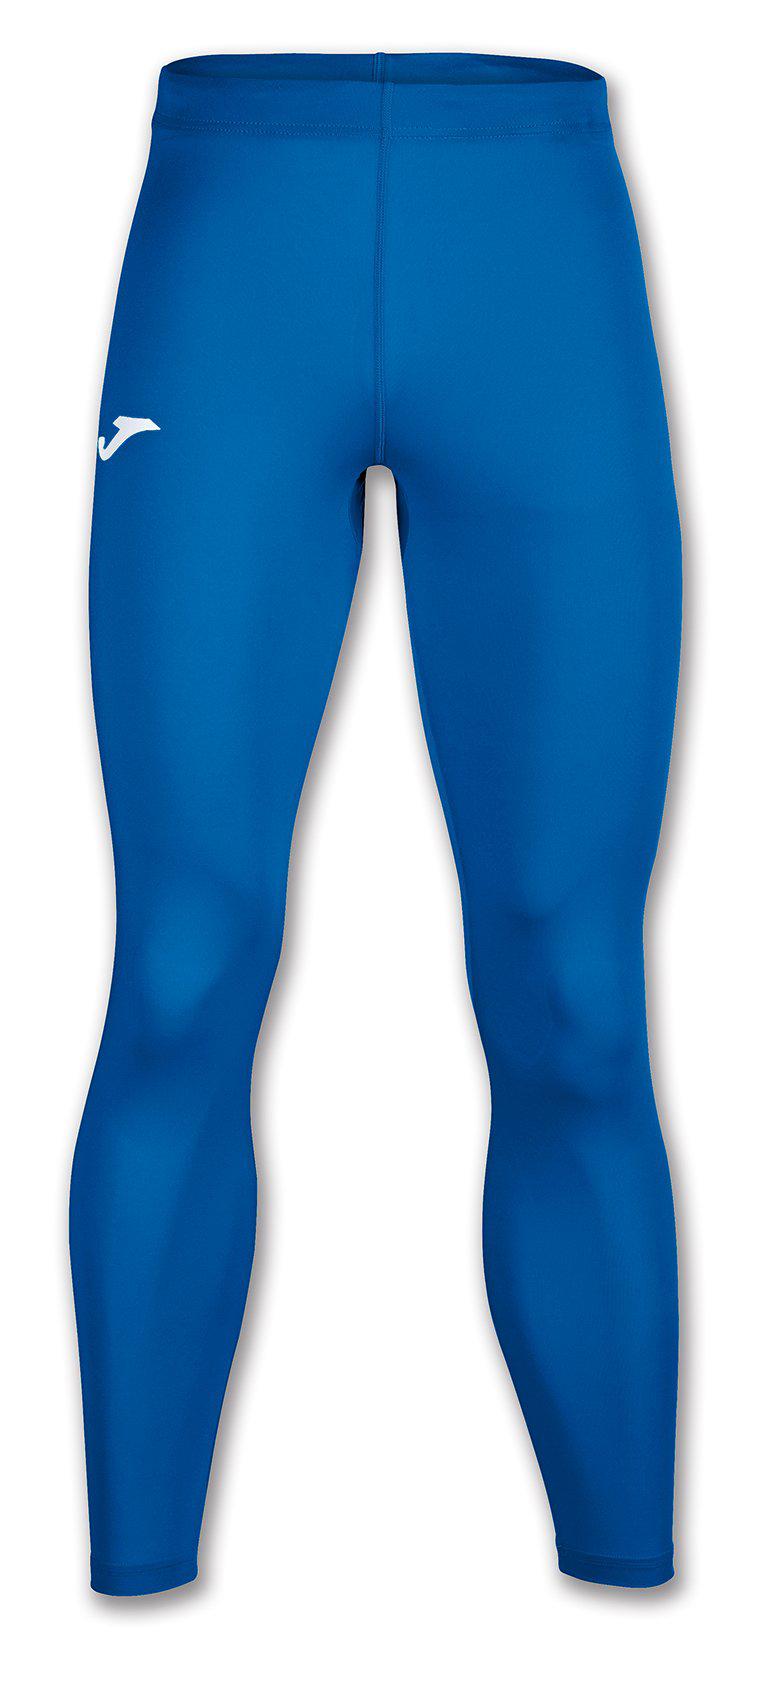 Joma Brama Academy Thermal Compression Tights-Soccer Command